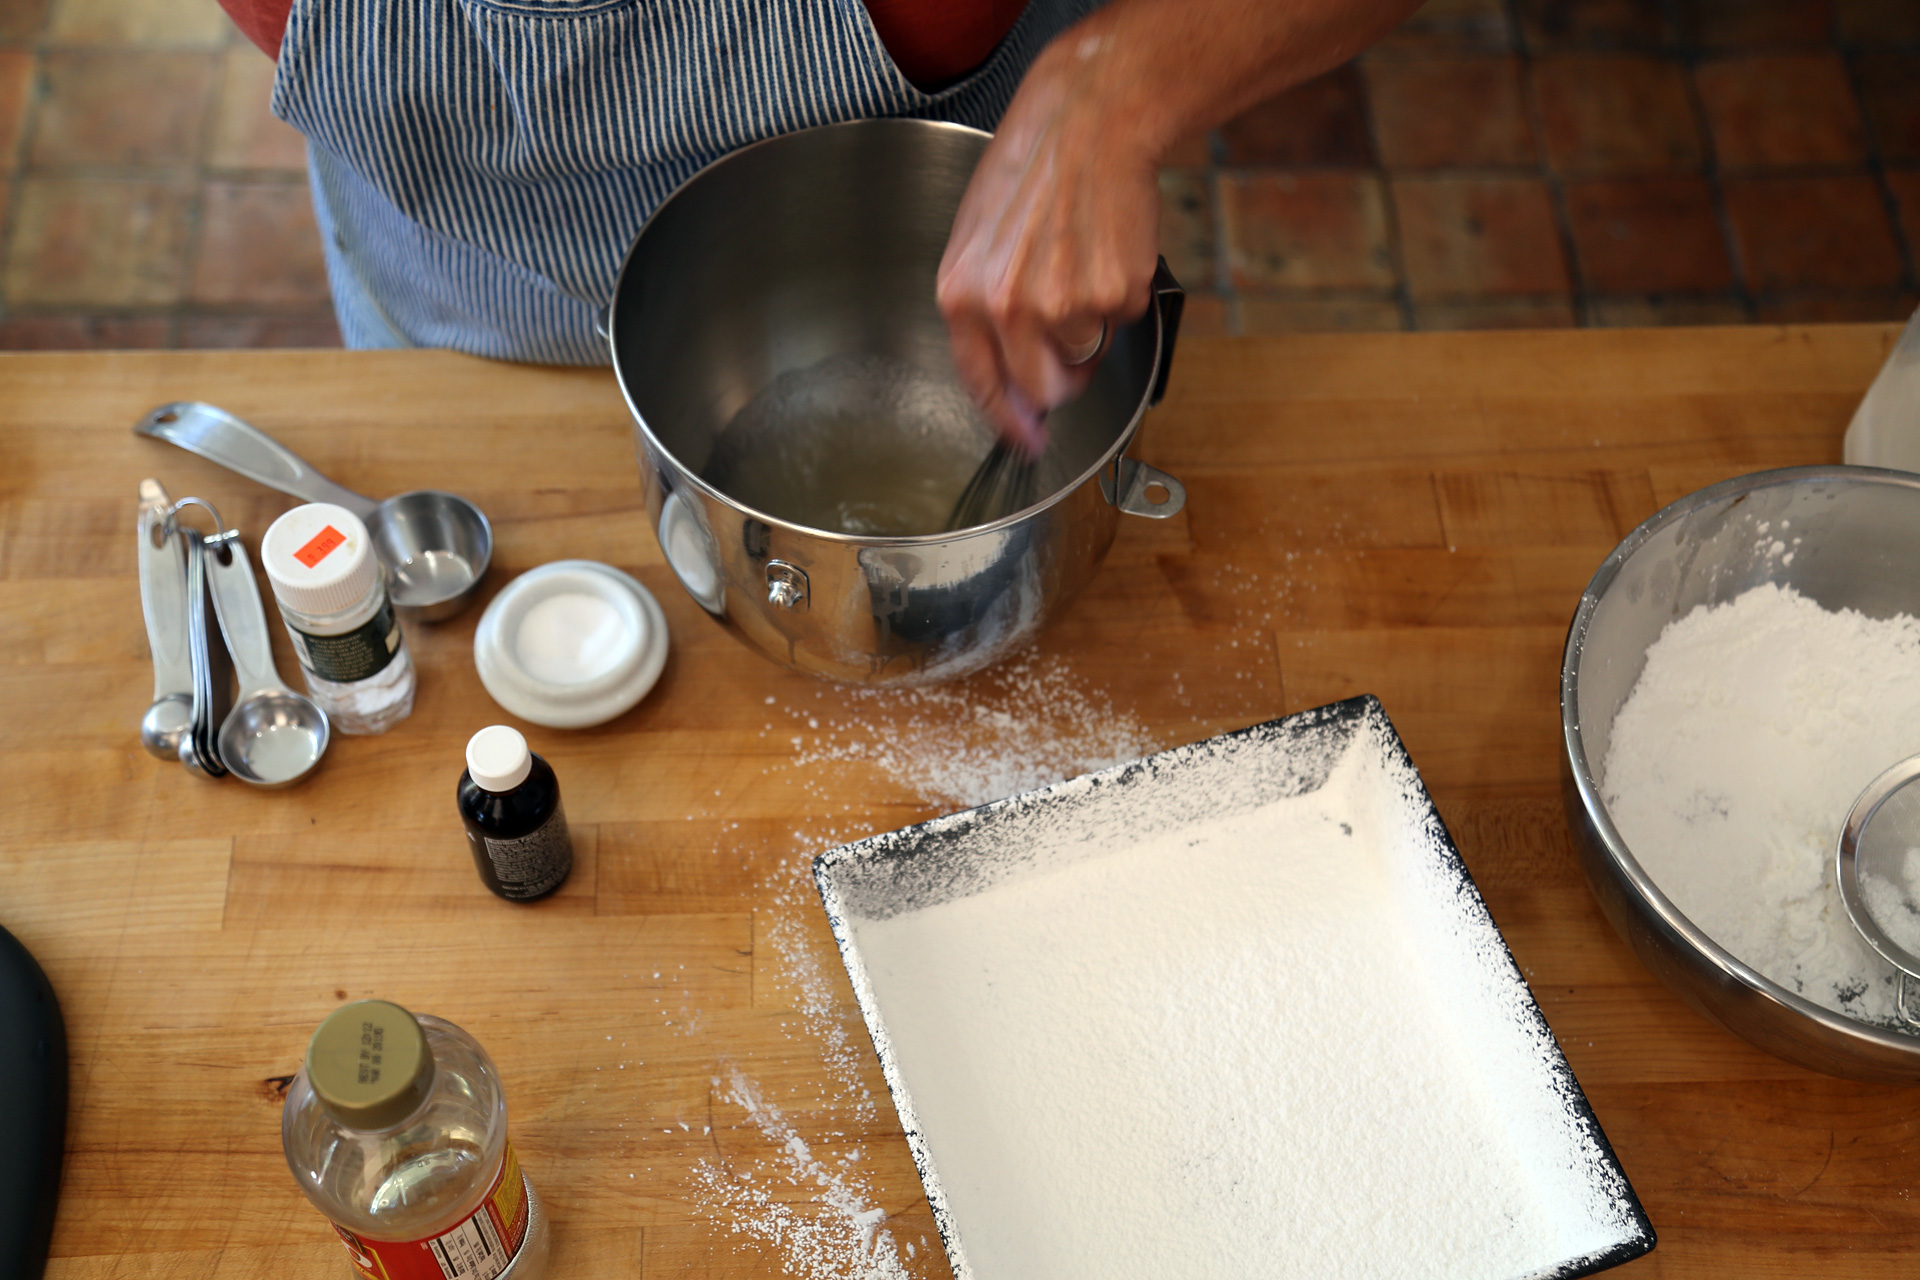 Whisk to combine, then set aside to soften for 5 minutes.